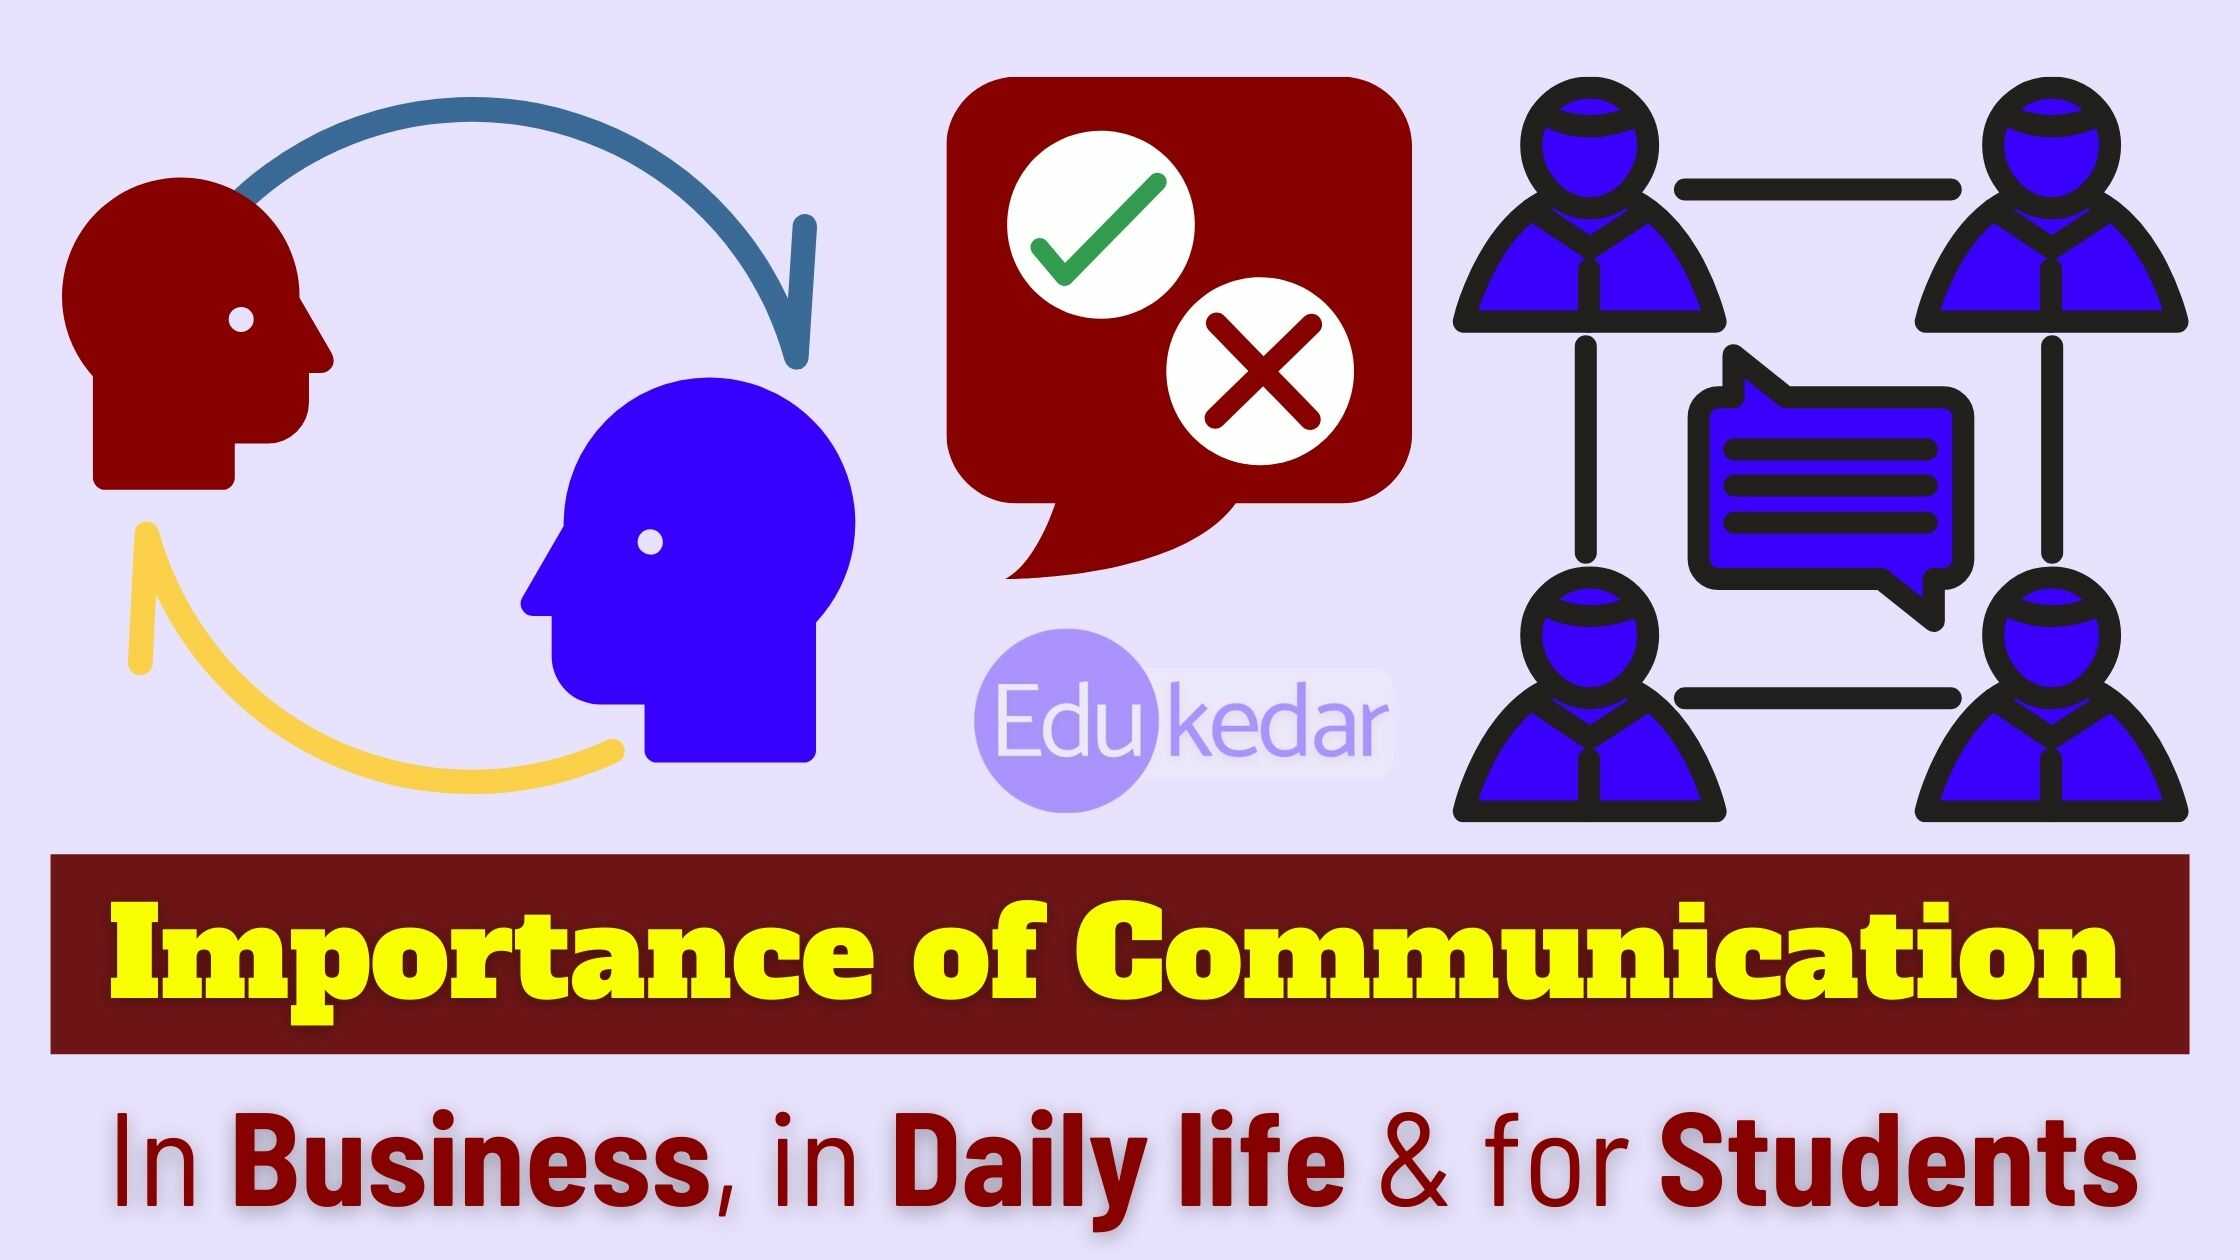 Importance of Communication skills in business